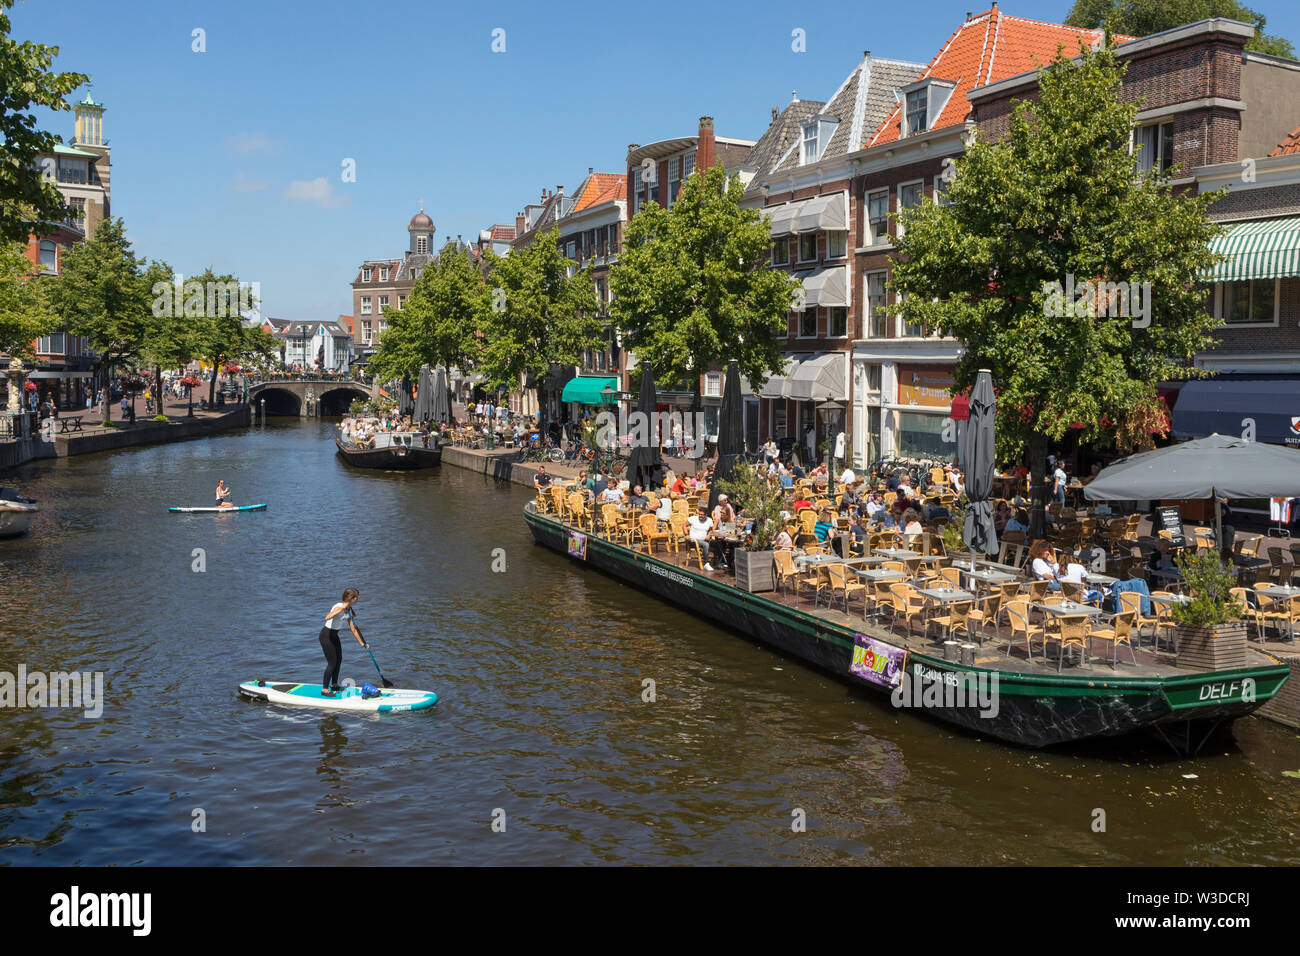 Leiden, Holland - June 26, 2019: Boat terrace on the canal at the Nieuwe Rijn in Leiden Stock Photo